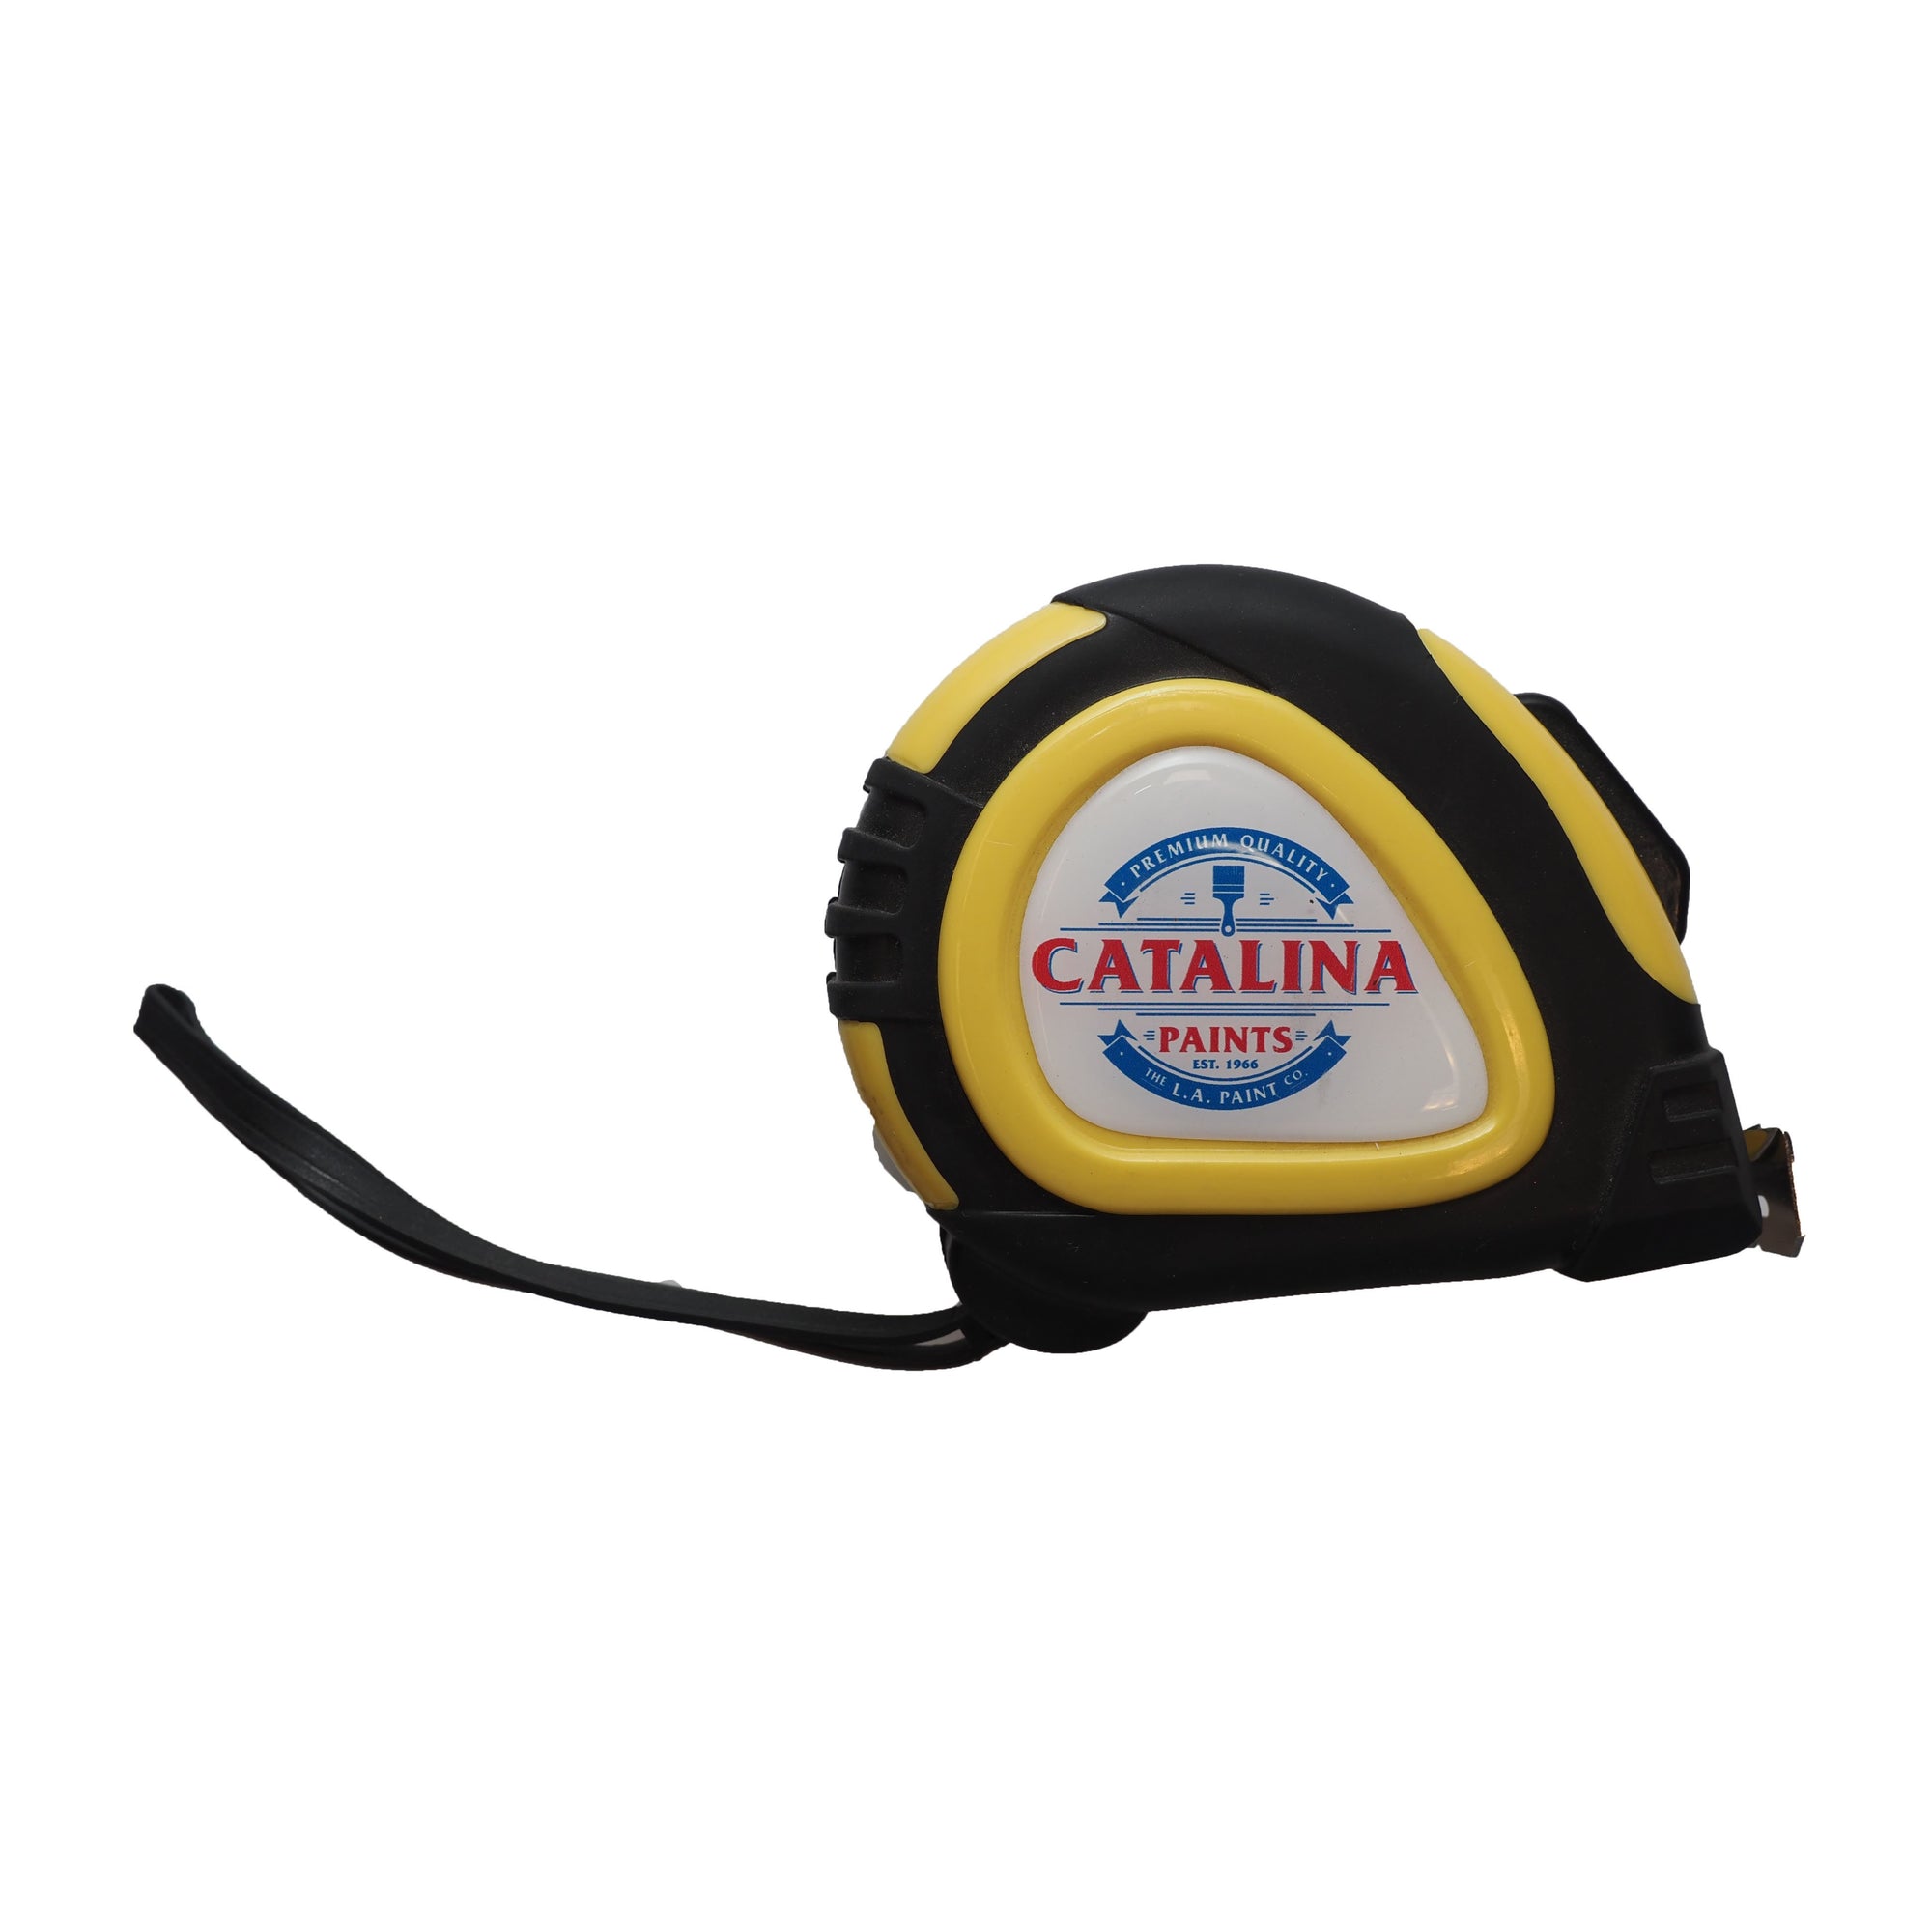 Catalina Paints Measuring Tape, available at Catalina Paints in CA.